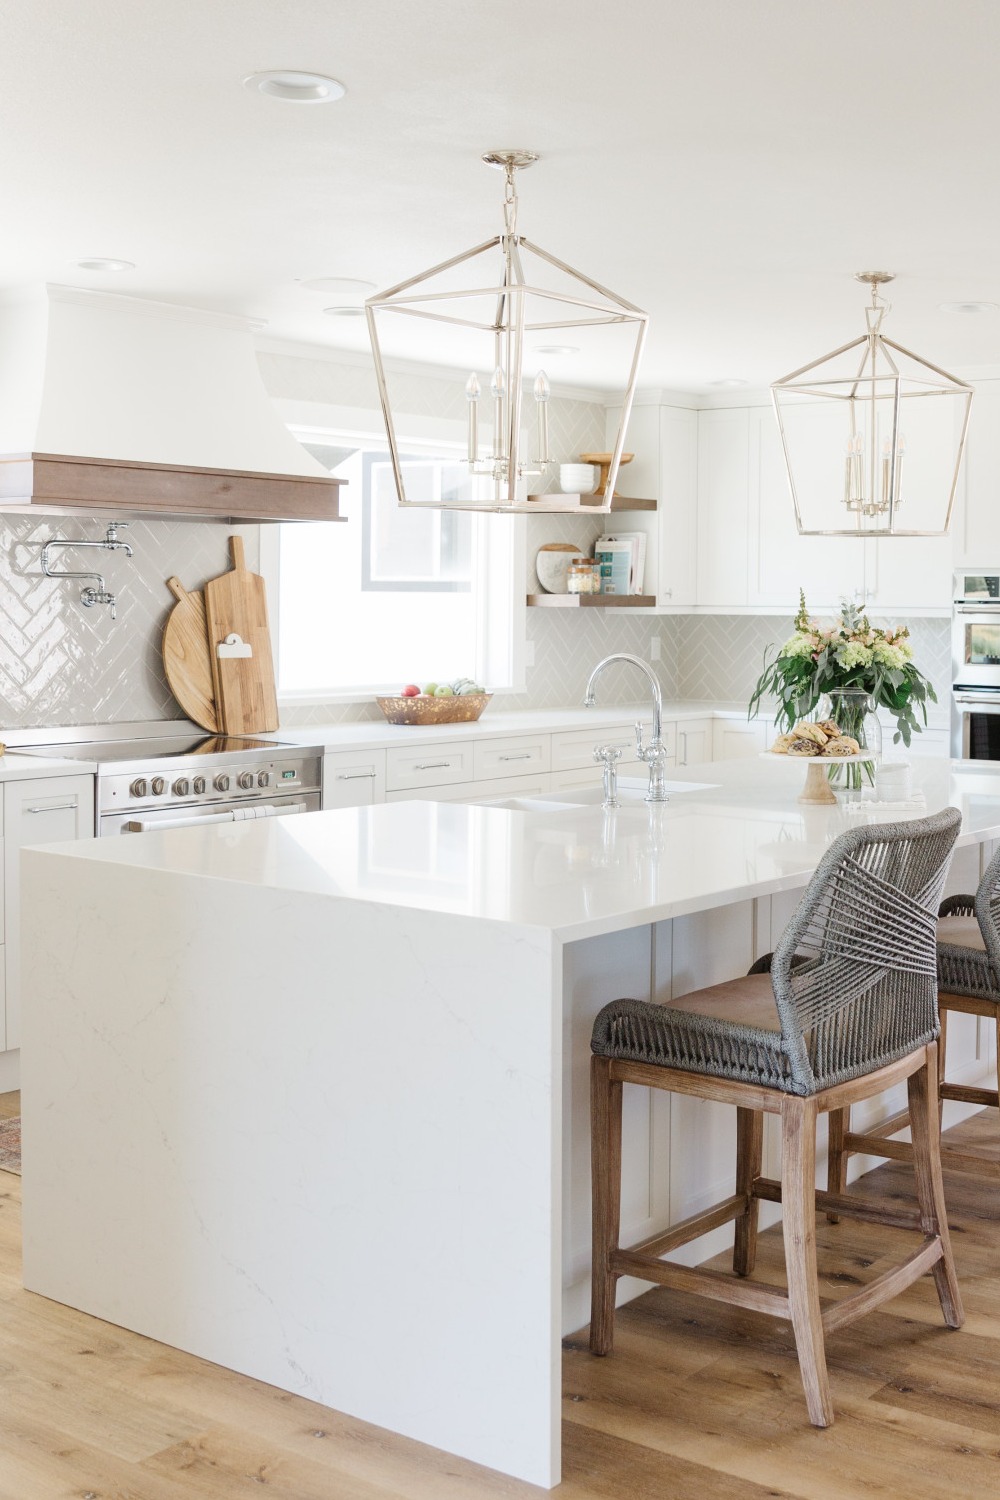 White Kitchen Cabinets White Cabinets Gray Subway Farmhouse Sink Pendant Lights Modern Chairs